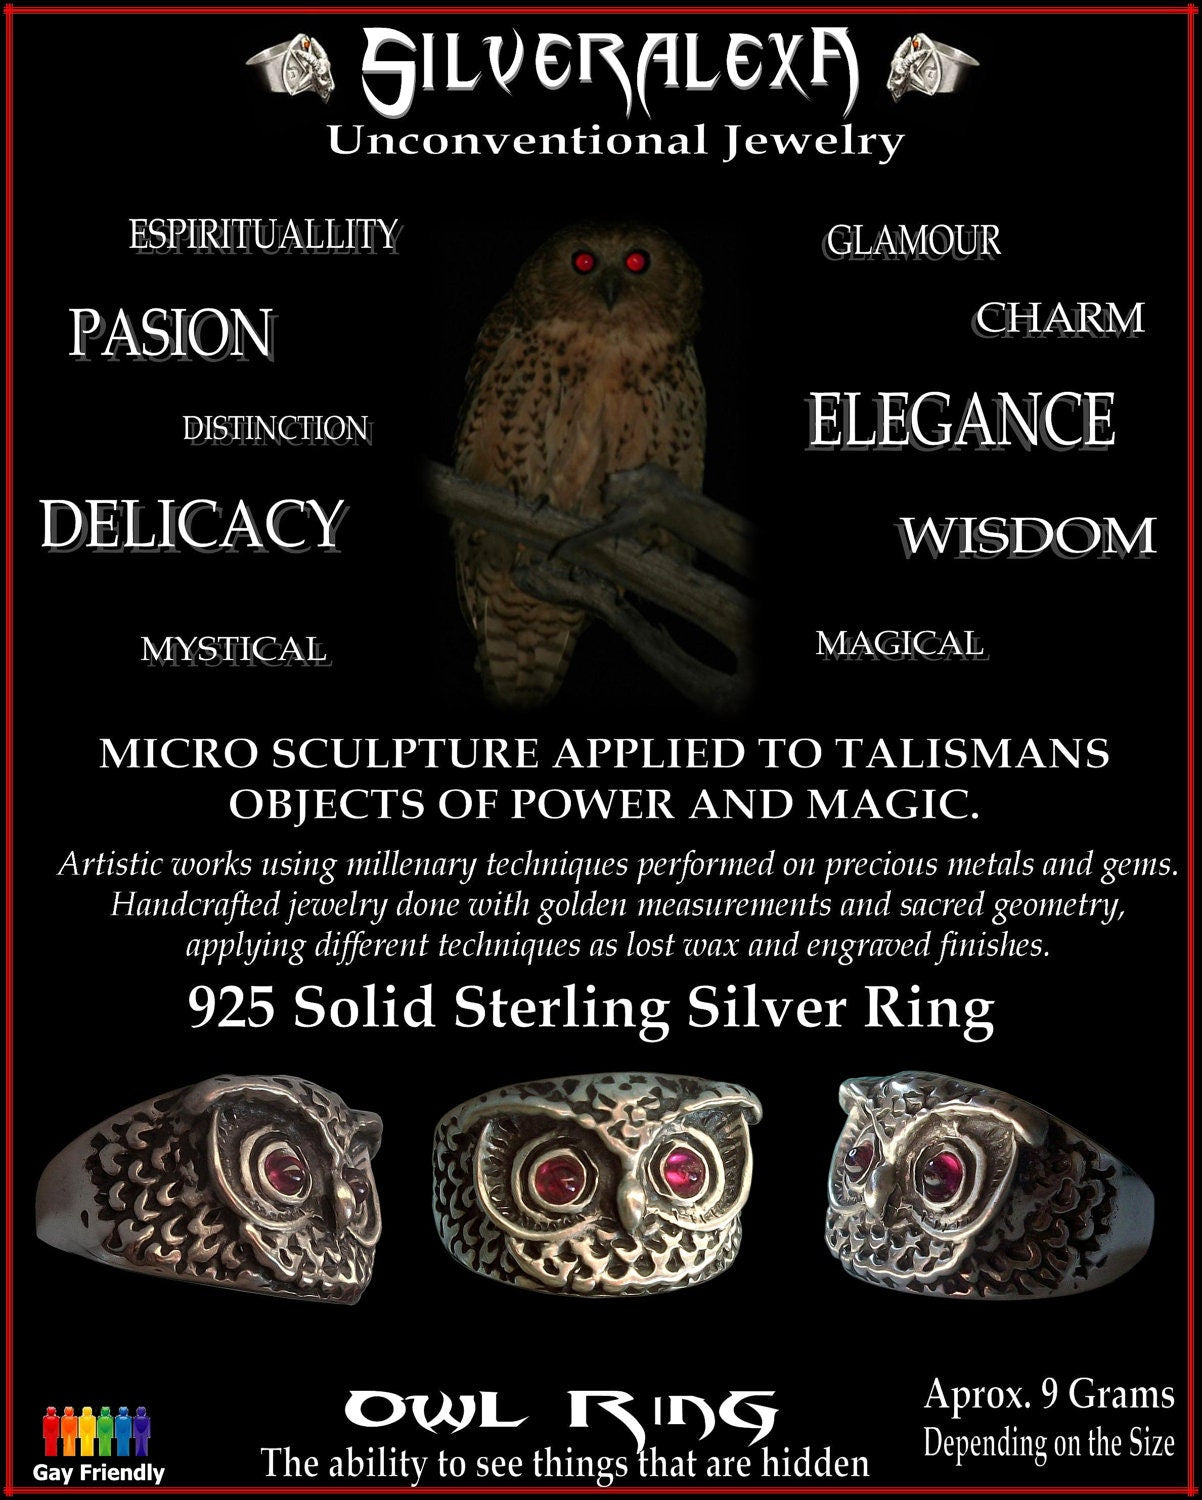 Owl ring - Sterling Silver Owl ring with garnet - All Sizes